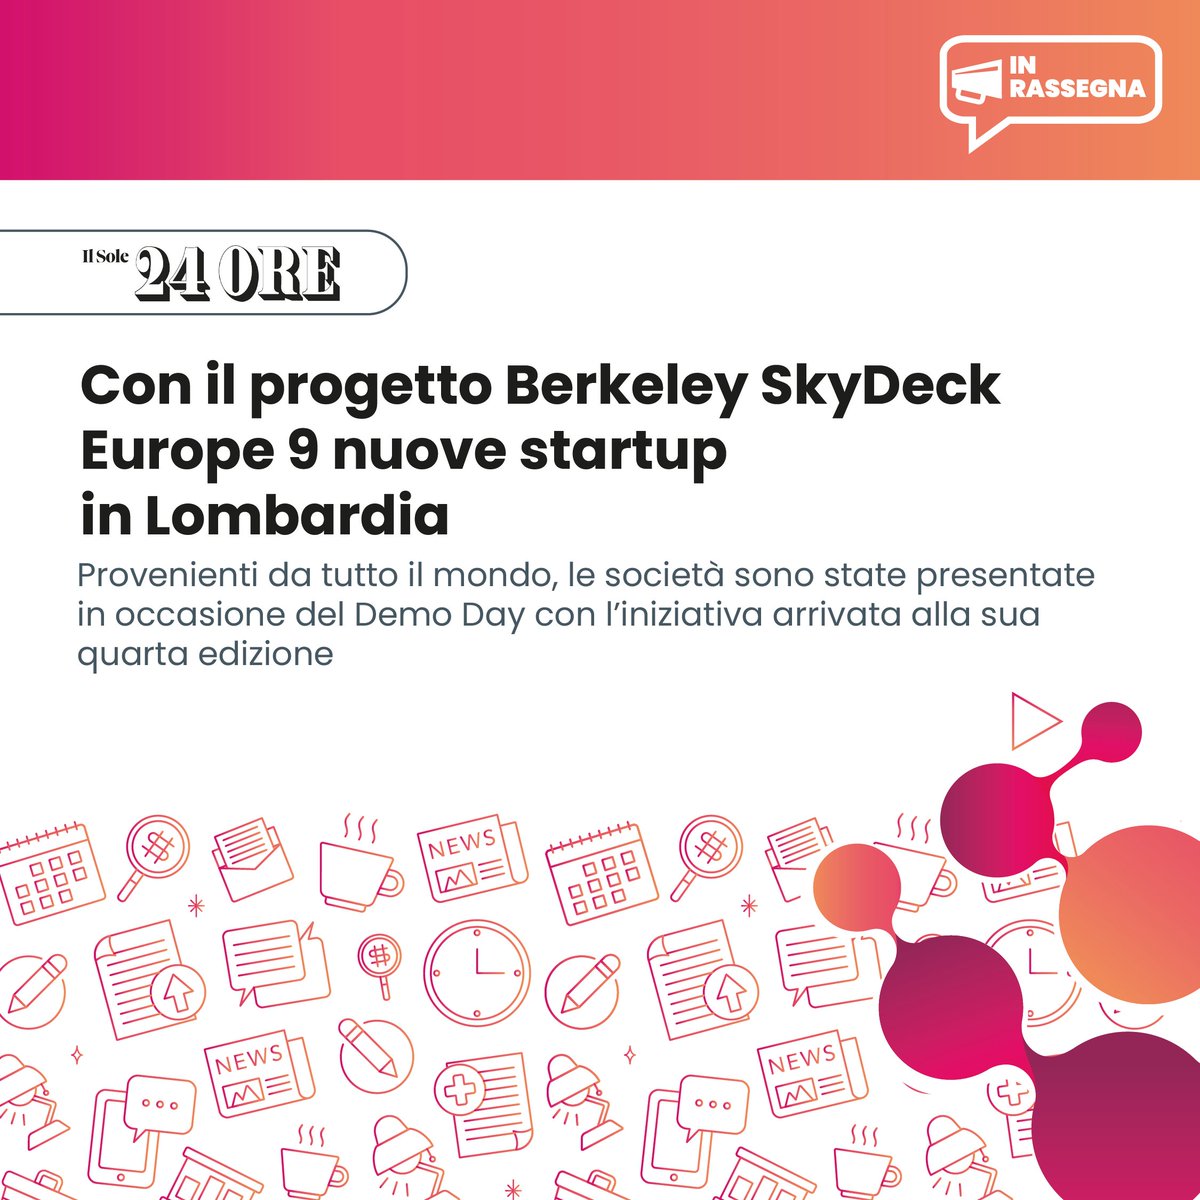 [Berkeley SkyDeck Europe, Milano on Sole 24 Ore website] 💥The new startups selected during Batch 17 and the results of the Berkeley SkyDeck Europe, Milano acceleration program, promoted by @SkyDeck_Cal, @CariploFactory, and @Lendlease, with the support of @RegLombardia and